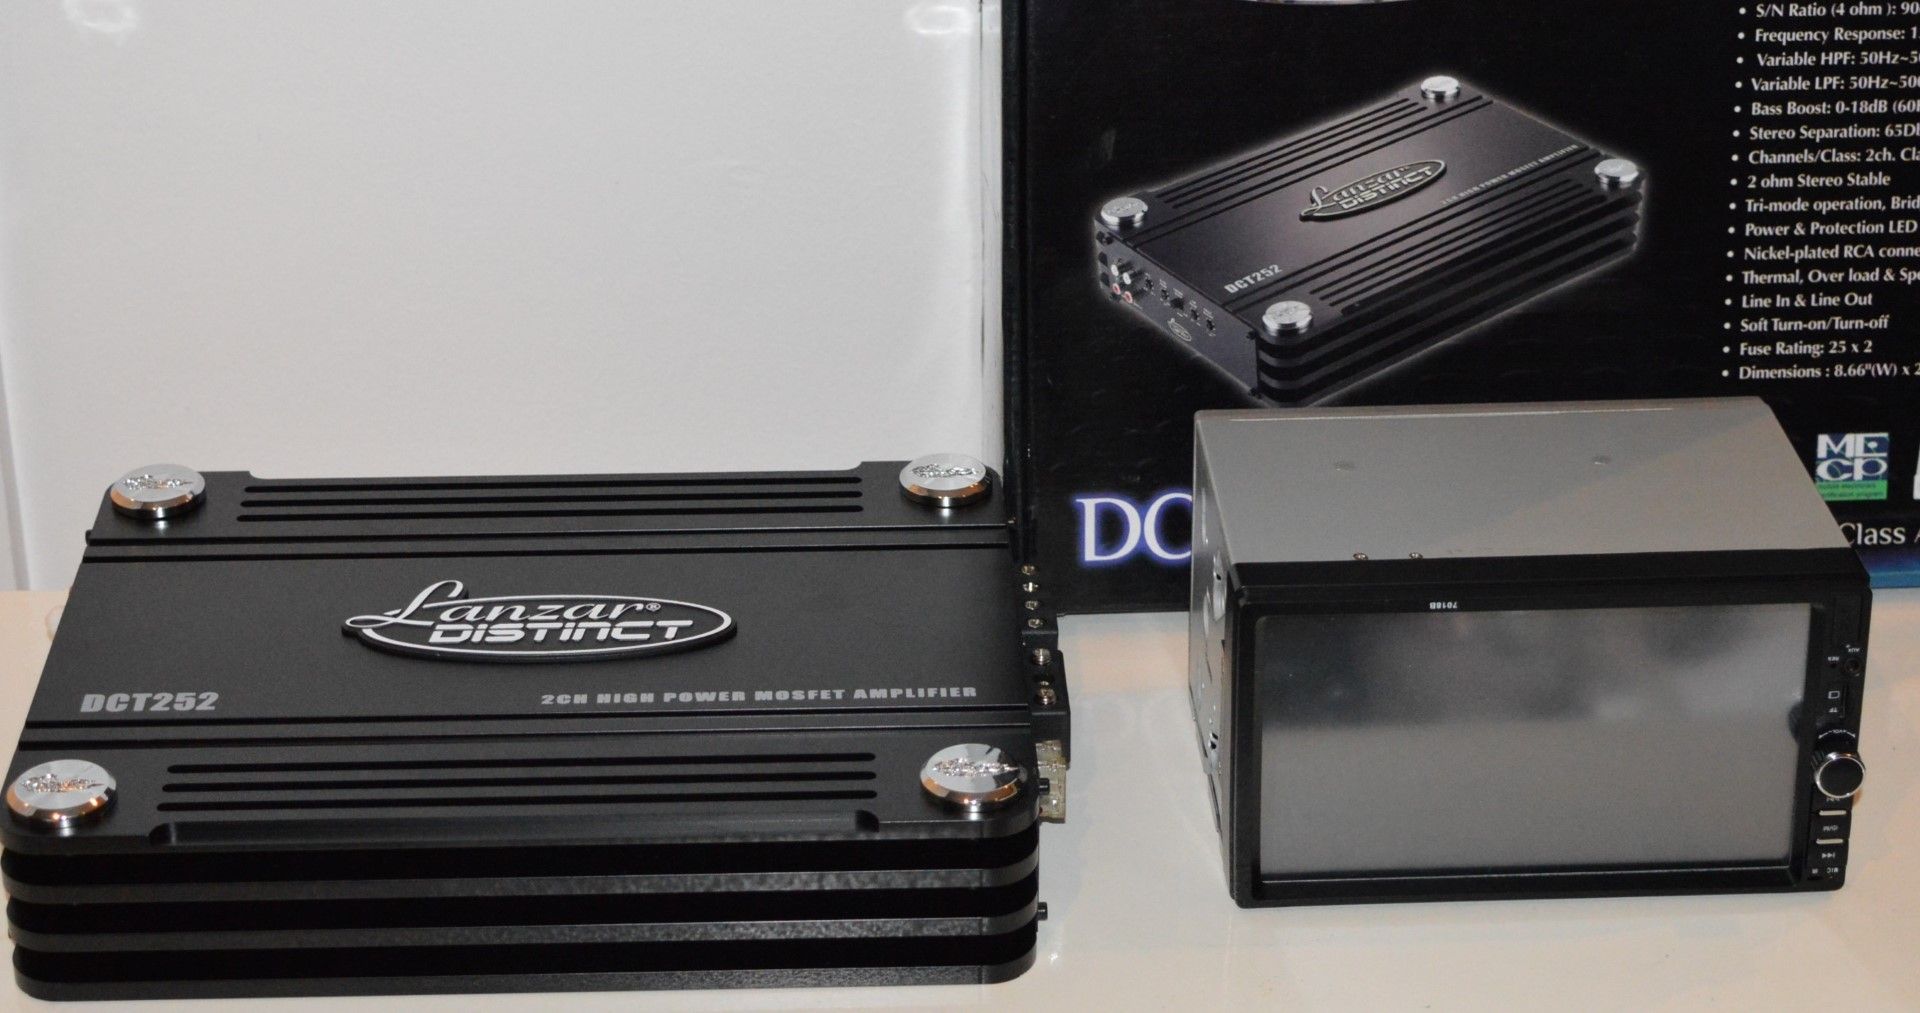 1 x Lanzar Distinct DCT252 3000w 2 Channel Full ET Class AB Vehicle Amplifier 7018B 7 Inch In-Dash - Image 2 of 8